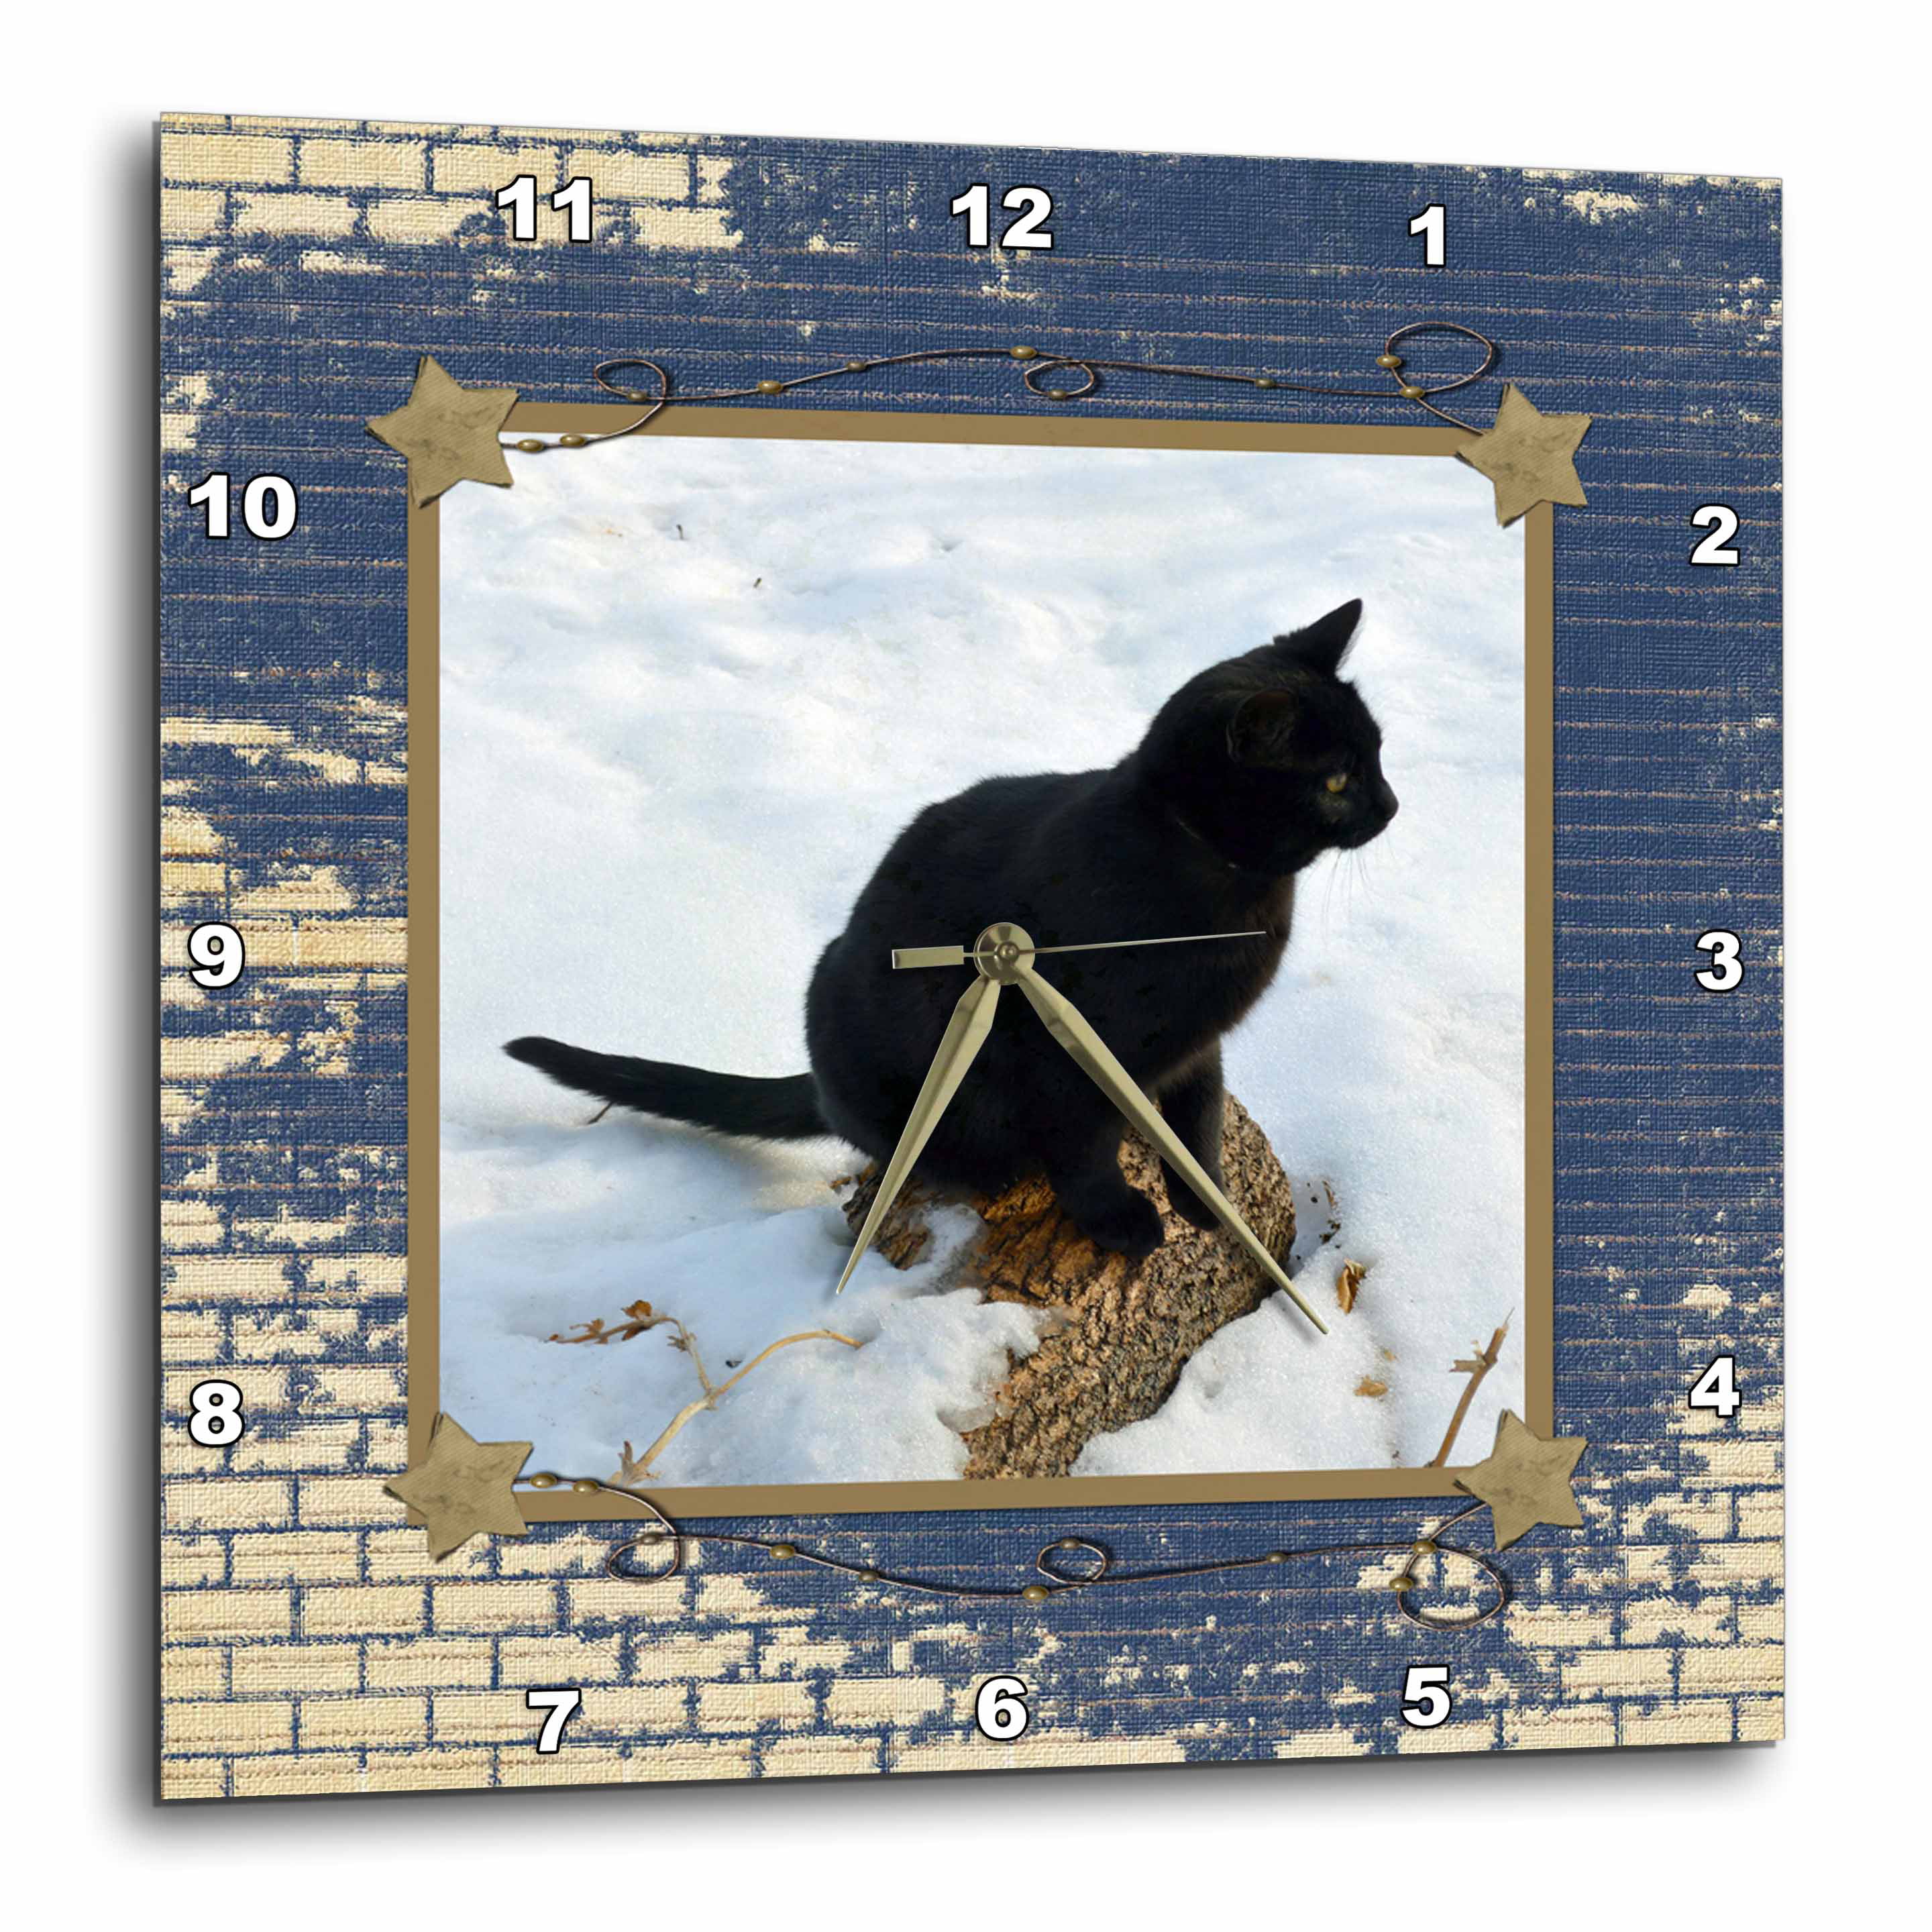 13 by 13-Inch 3dRose dpp/_180848/_2 Frisky Black Cat on Log in Snow Ready to Leap with Denim Blue Brick Frame-Wall Clock